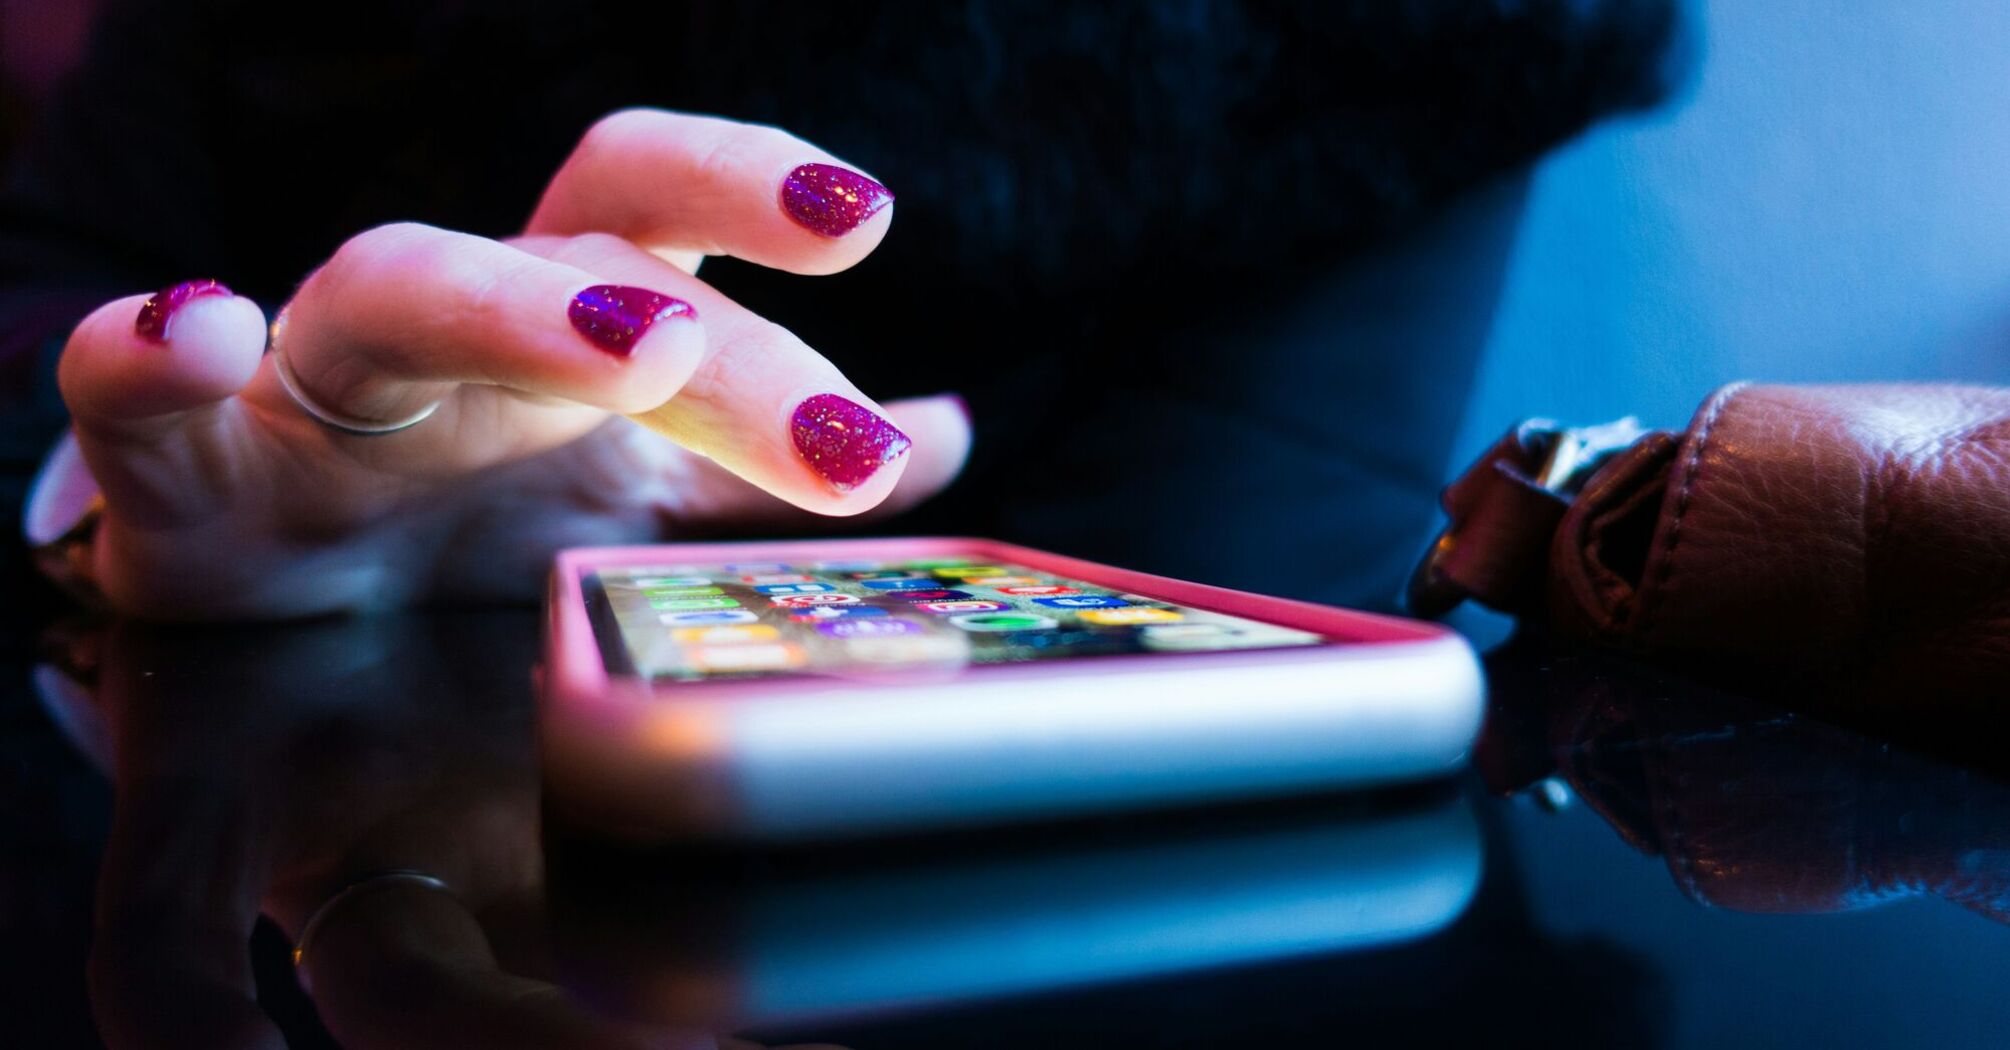 A person's hands using a smartphone, with the phone's screen showing colorful app icons 